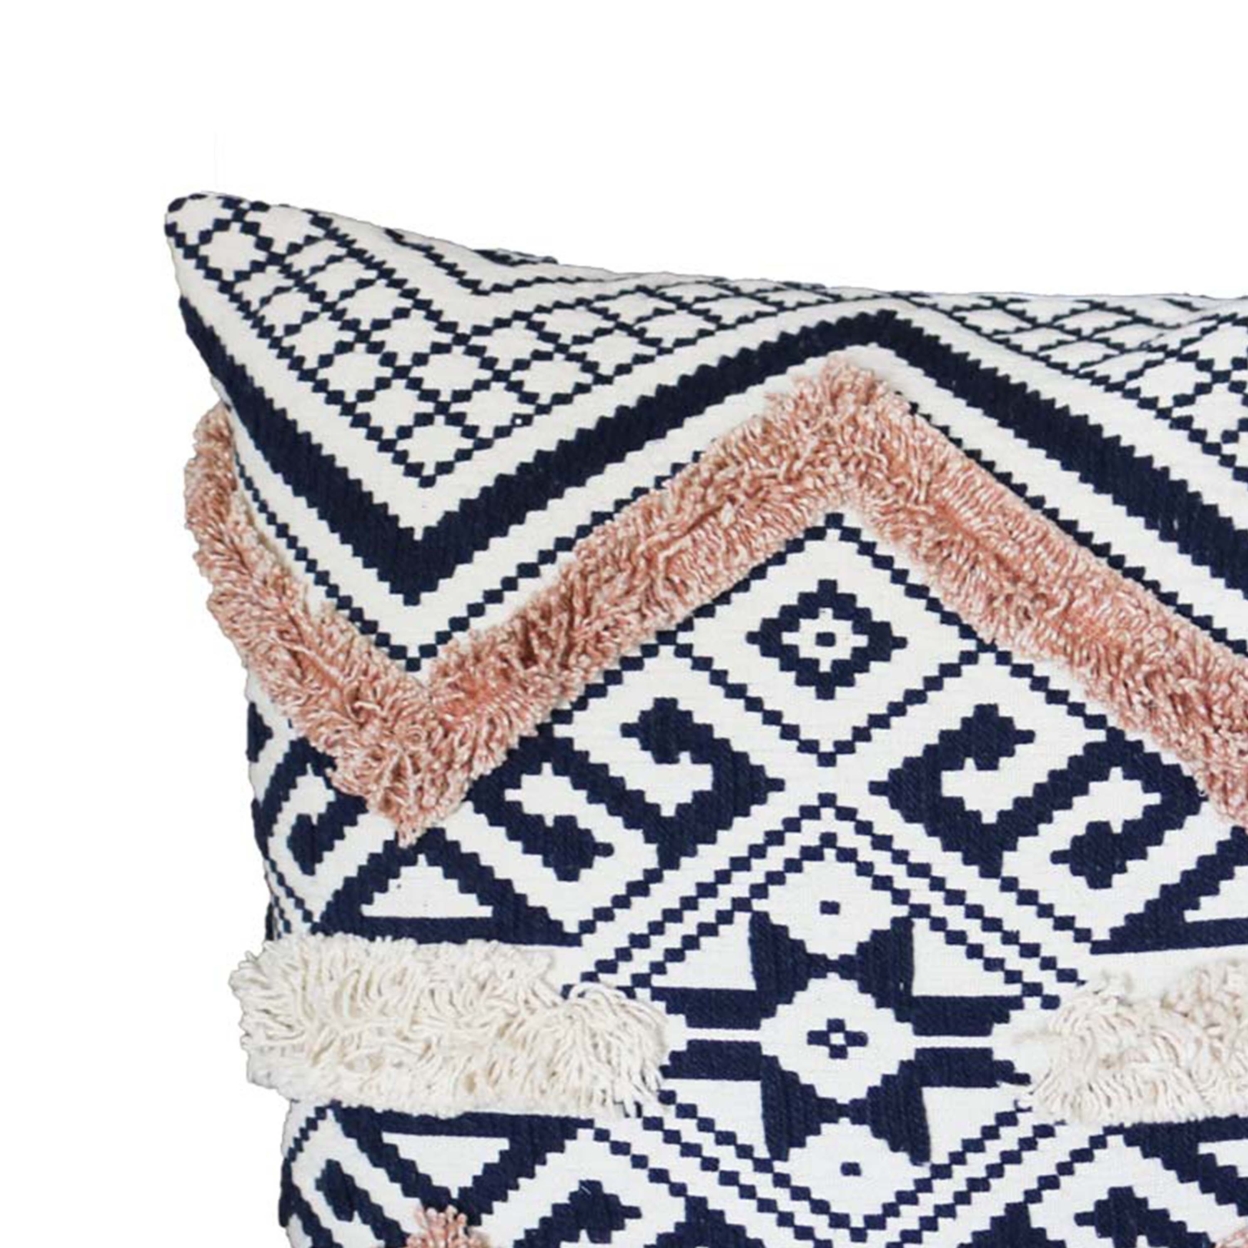 18 X 18 Handcrafted Square Jacquard Cotton Accent Throw Pillow, Geometric Tribal Pattern, Set Of 2, White, Black, Beige